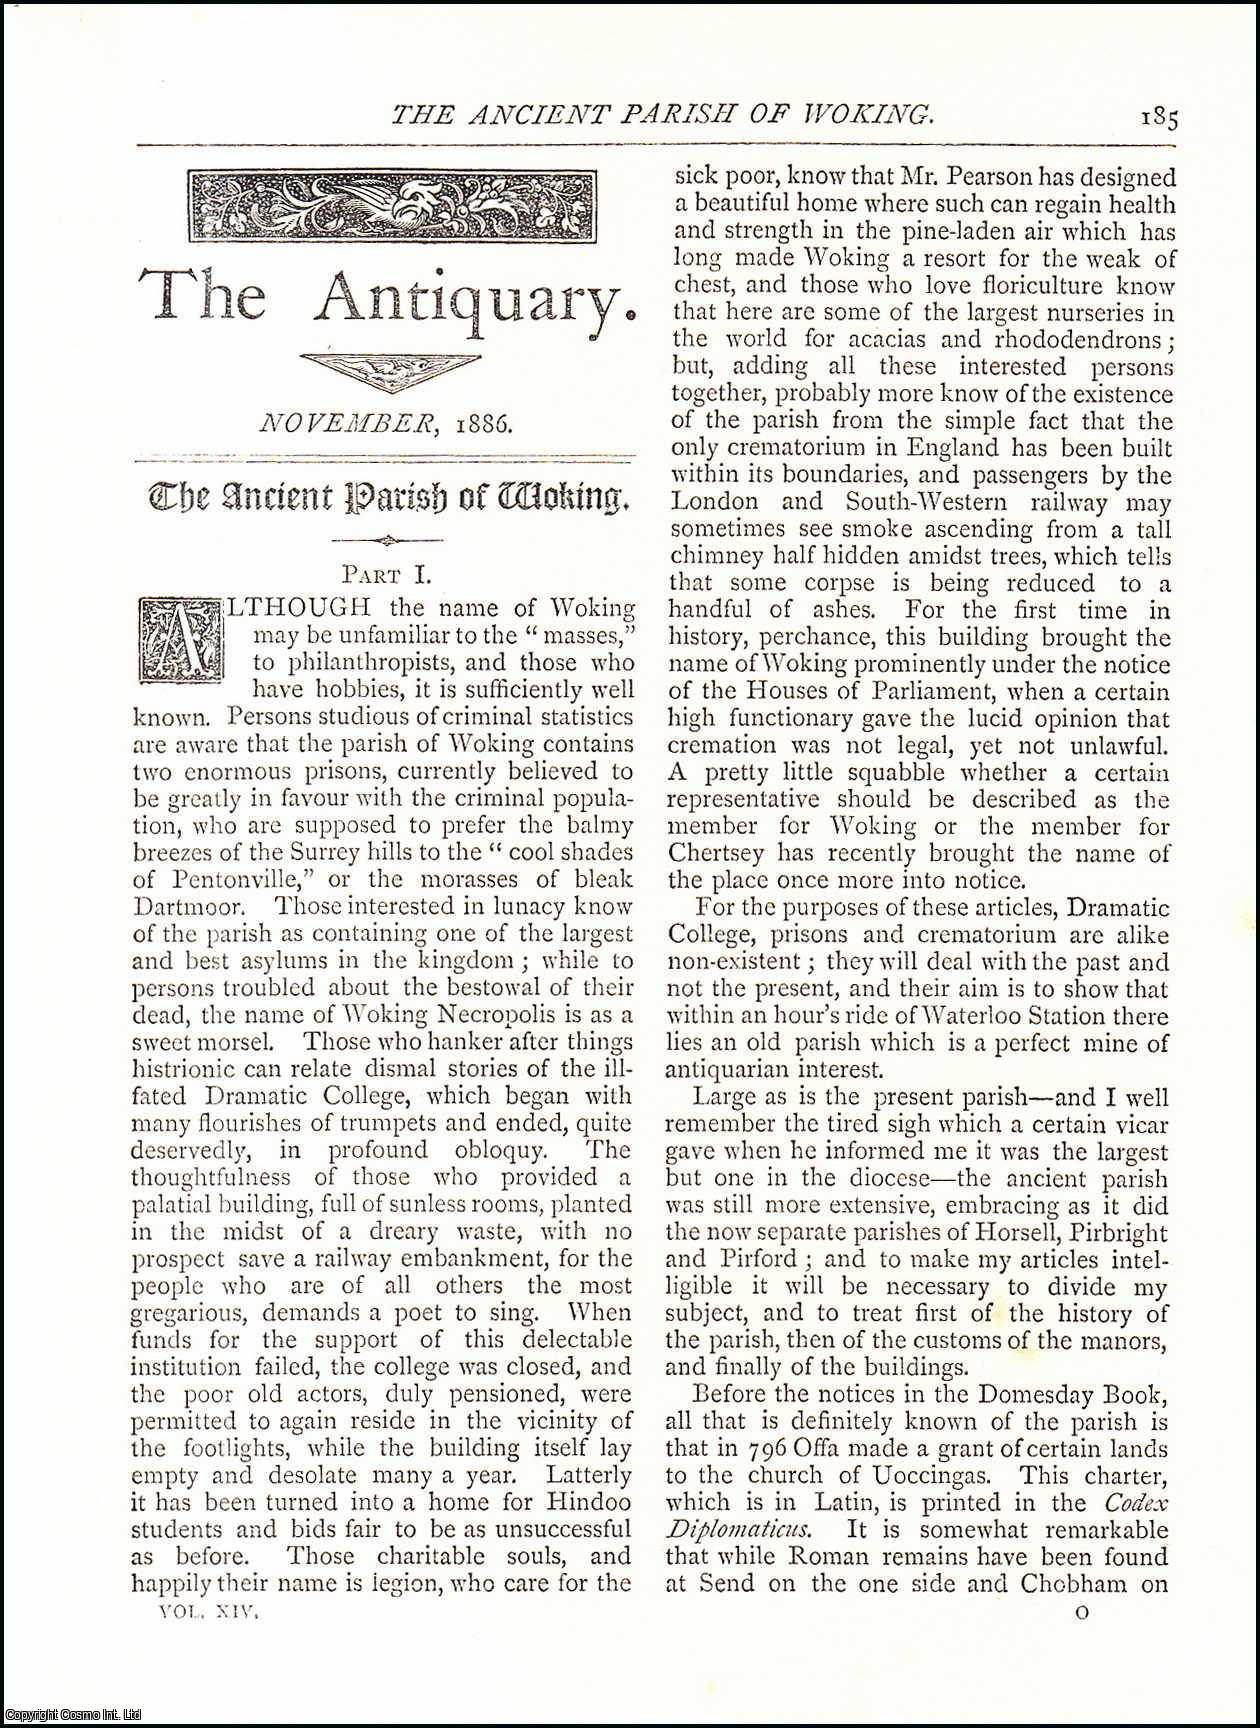 No Author Stated - The Ancient Parish of Woking Part I and II. A complete original article from The Antiquary Magazine, 1886.